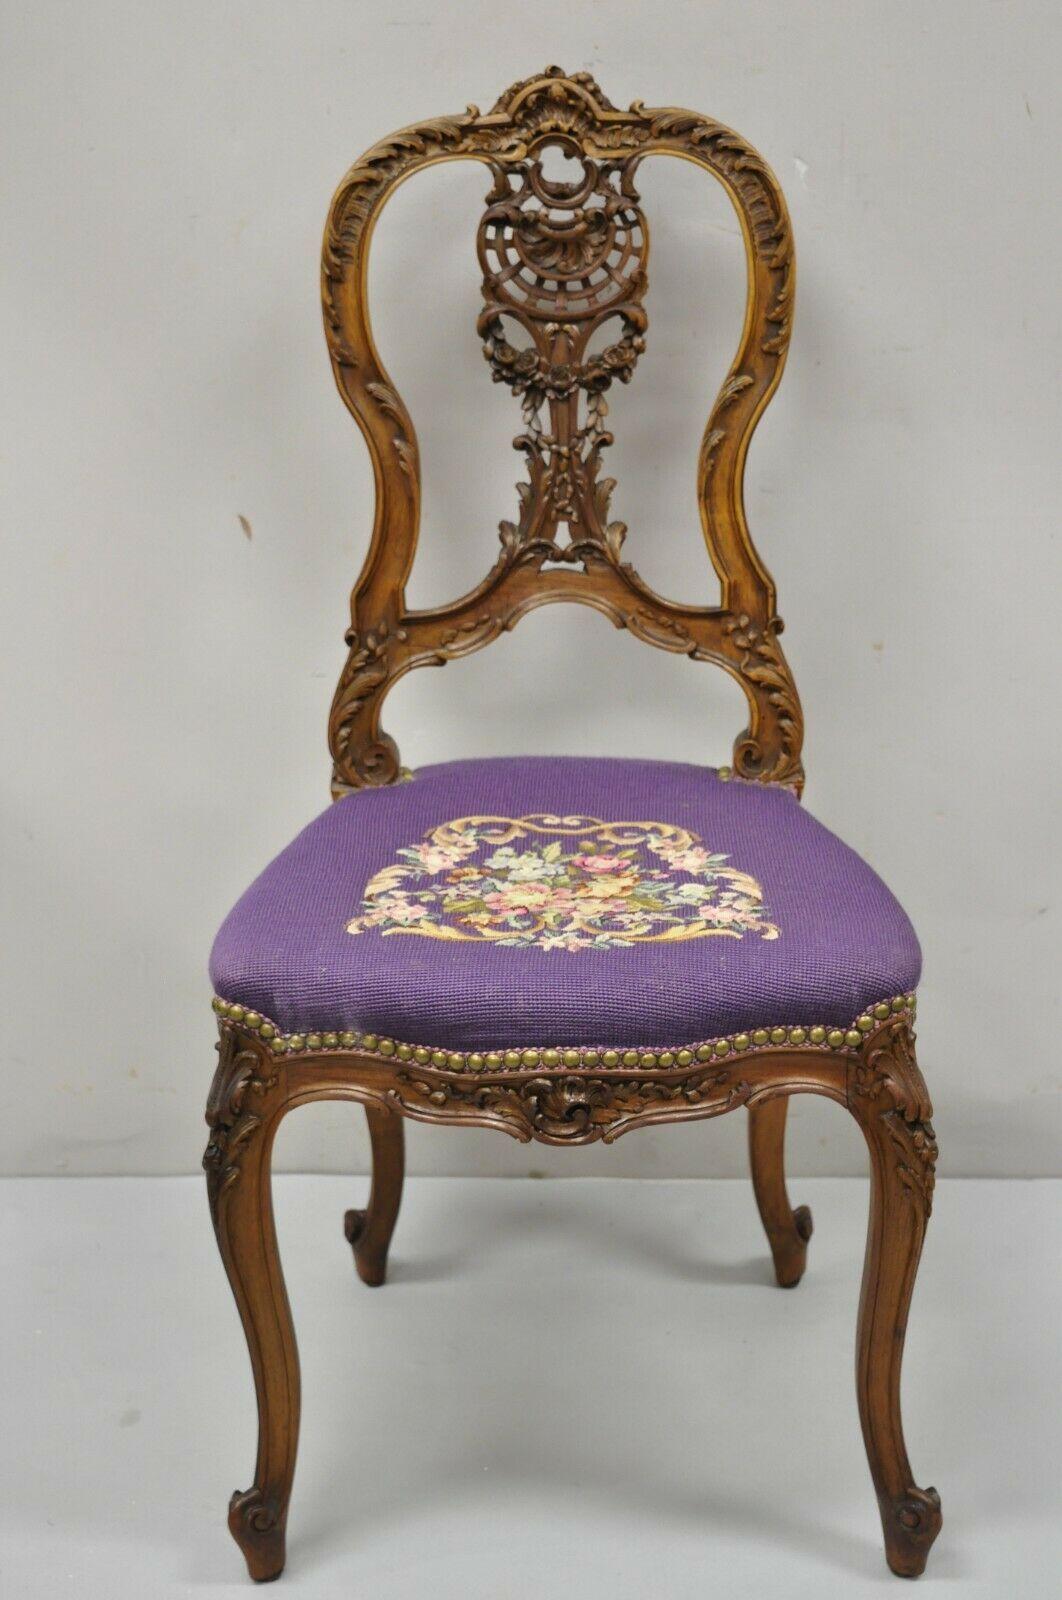 Antique French Louis XV Style Victorian carved mahogany accent side chair purple needlepoint. Item features purple needlepoint floral print seat, solid wood frame, nicely carved details, cabriole legs, very nice antique item, quality craftsmanship,